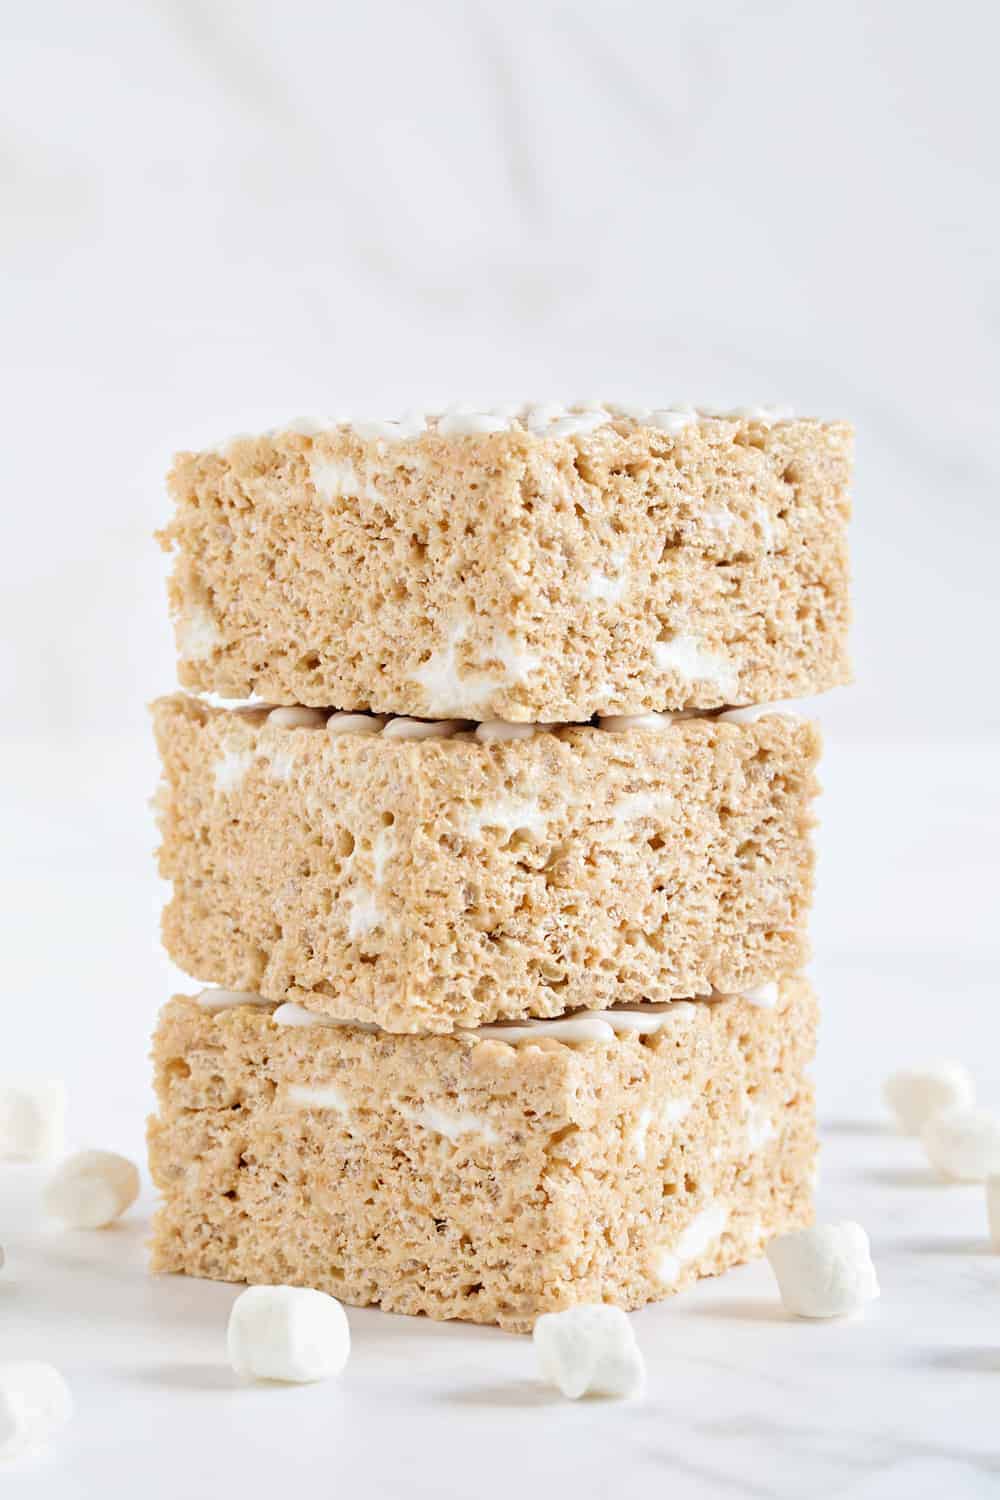 Brown Butter Rice Krispie Treats take your favorite marshmallow treats to the next level with brown butter and maple for a fall-themed treat that is as easy as can be.